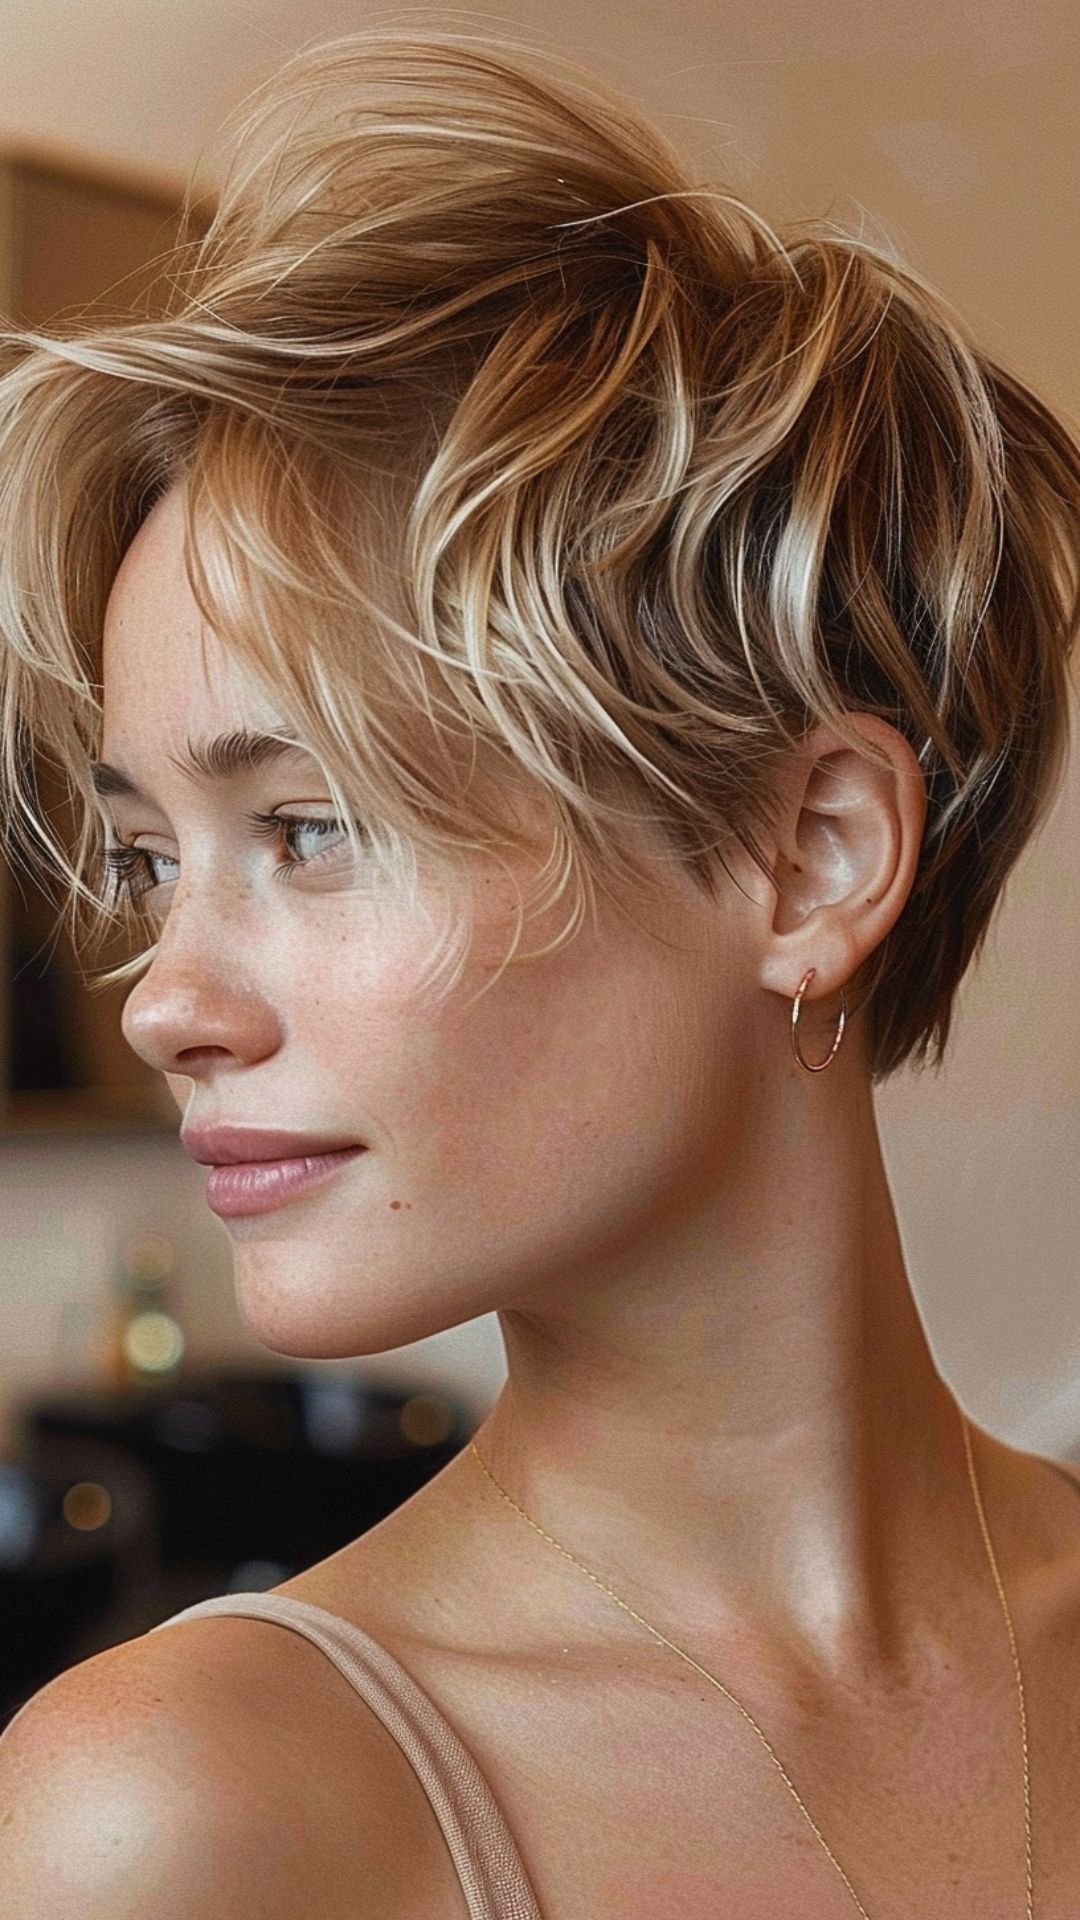 Chic Ways to Style Short Hair Like a Pro